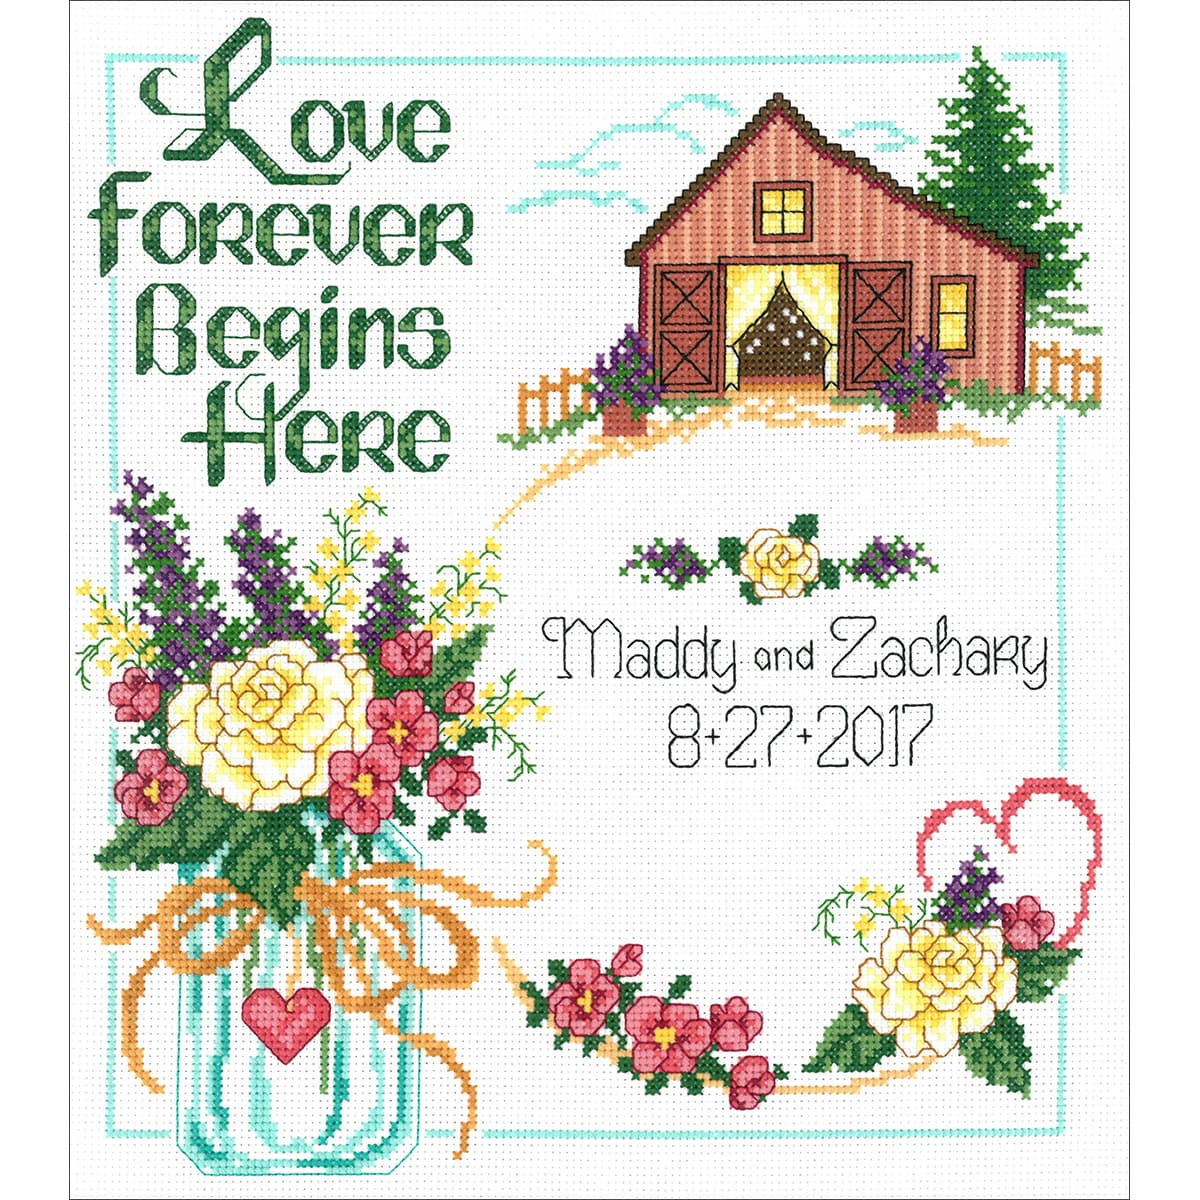 Imaginating Country Wedding Counted Cross Stitch Kit